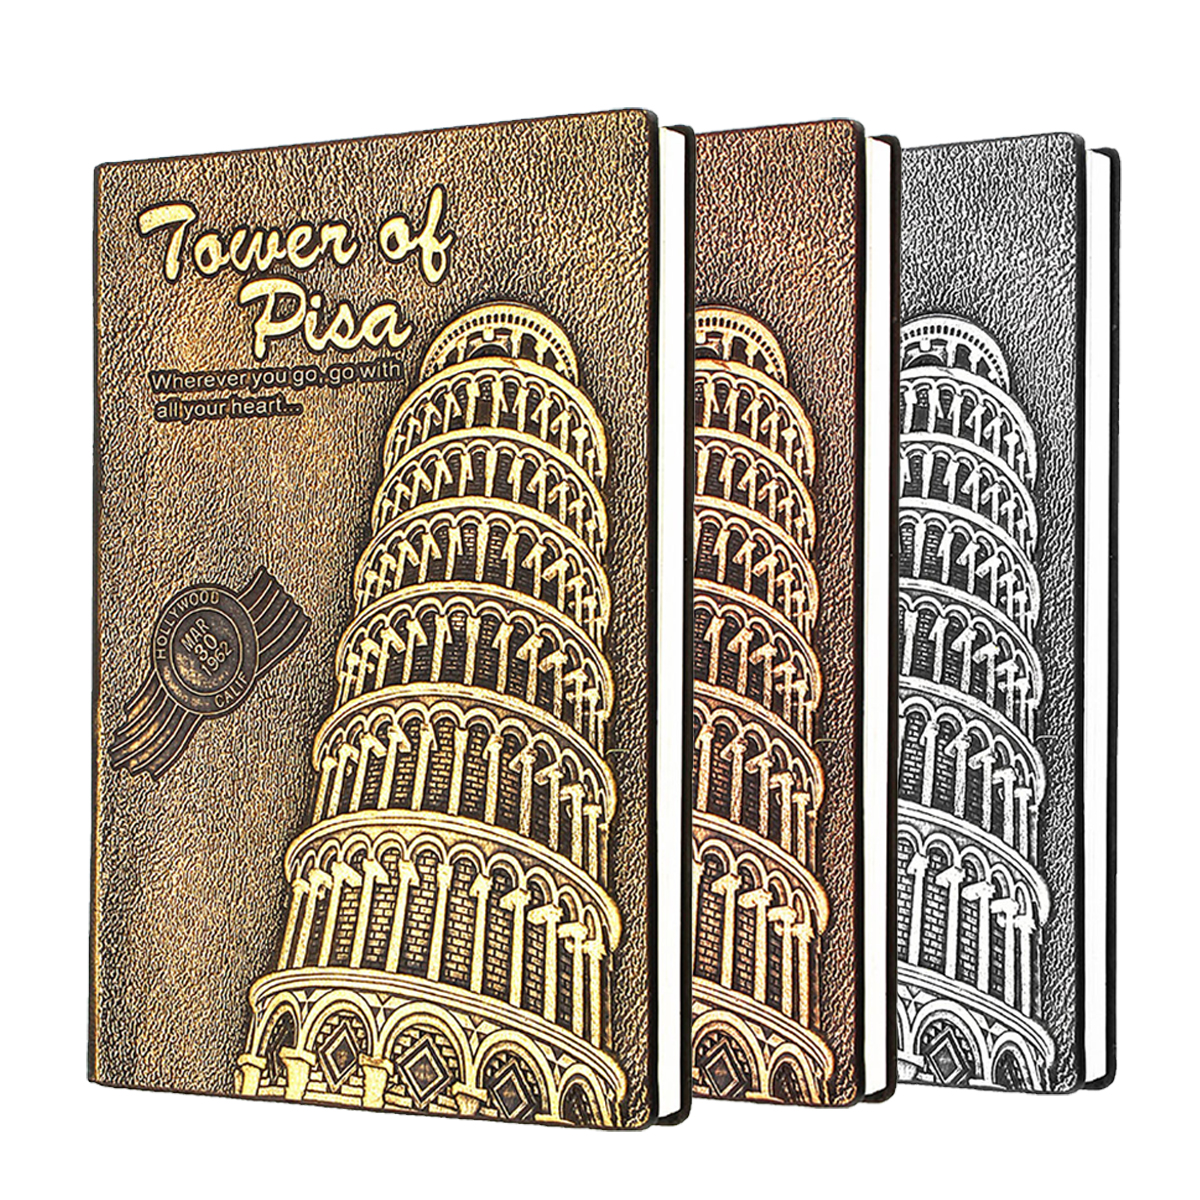 

Leaning Tower of Pisa Diary Book Vintage Leather Fashion Notebook Lined Paper 128 Sheets 256 Pages